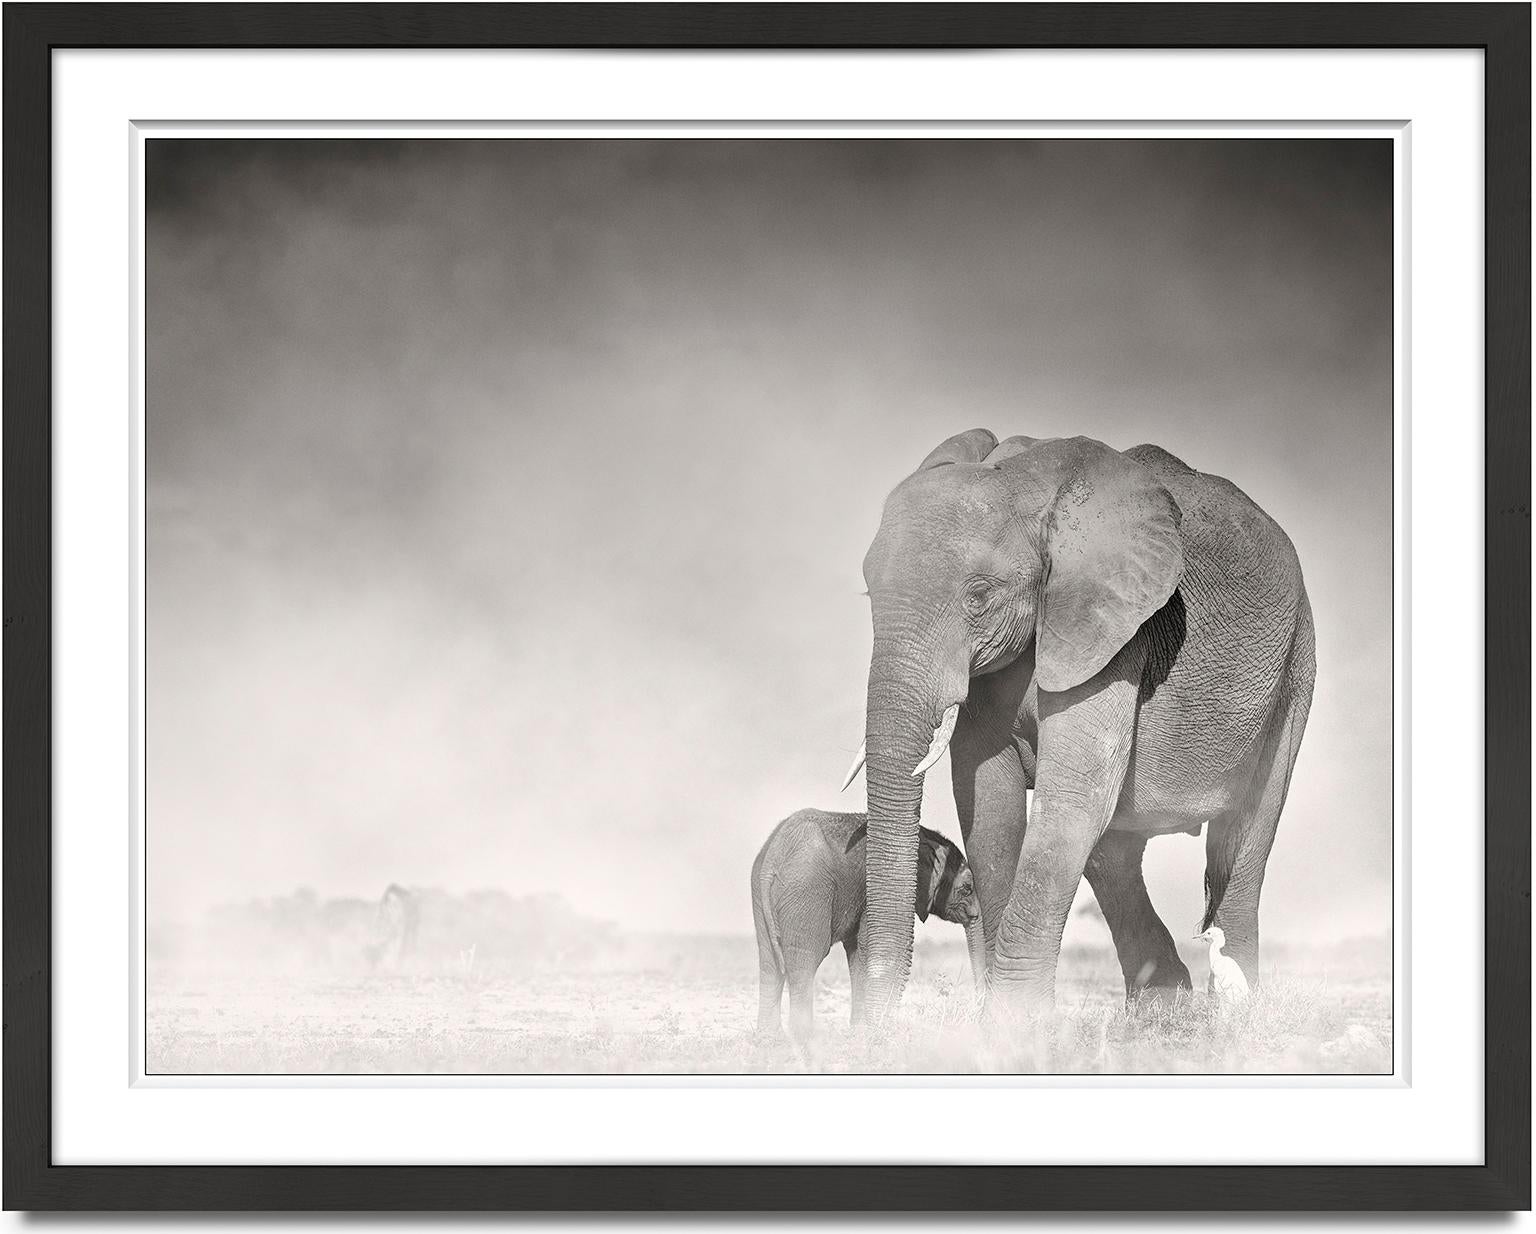 Connected, Kenya, Elephant, animal, wildlife, black and white photography - Photograph by Joachim Schmeisser